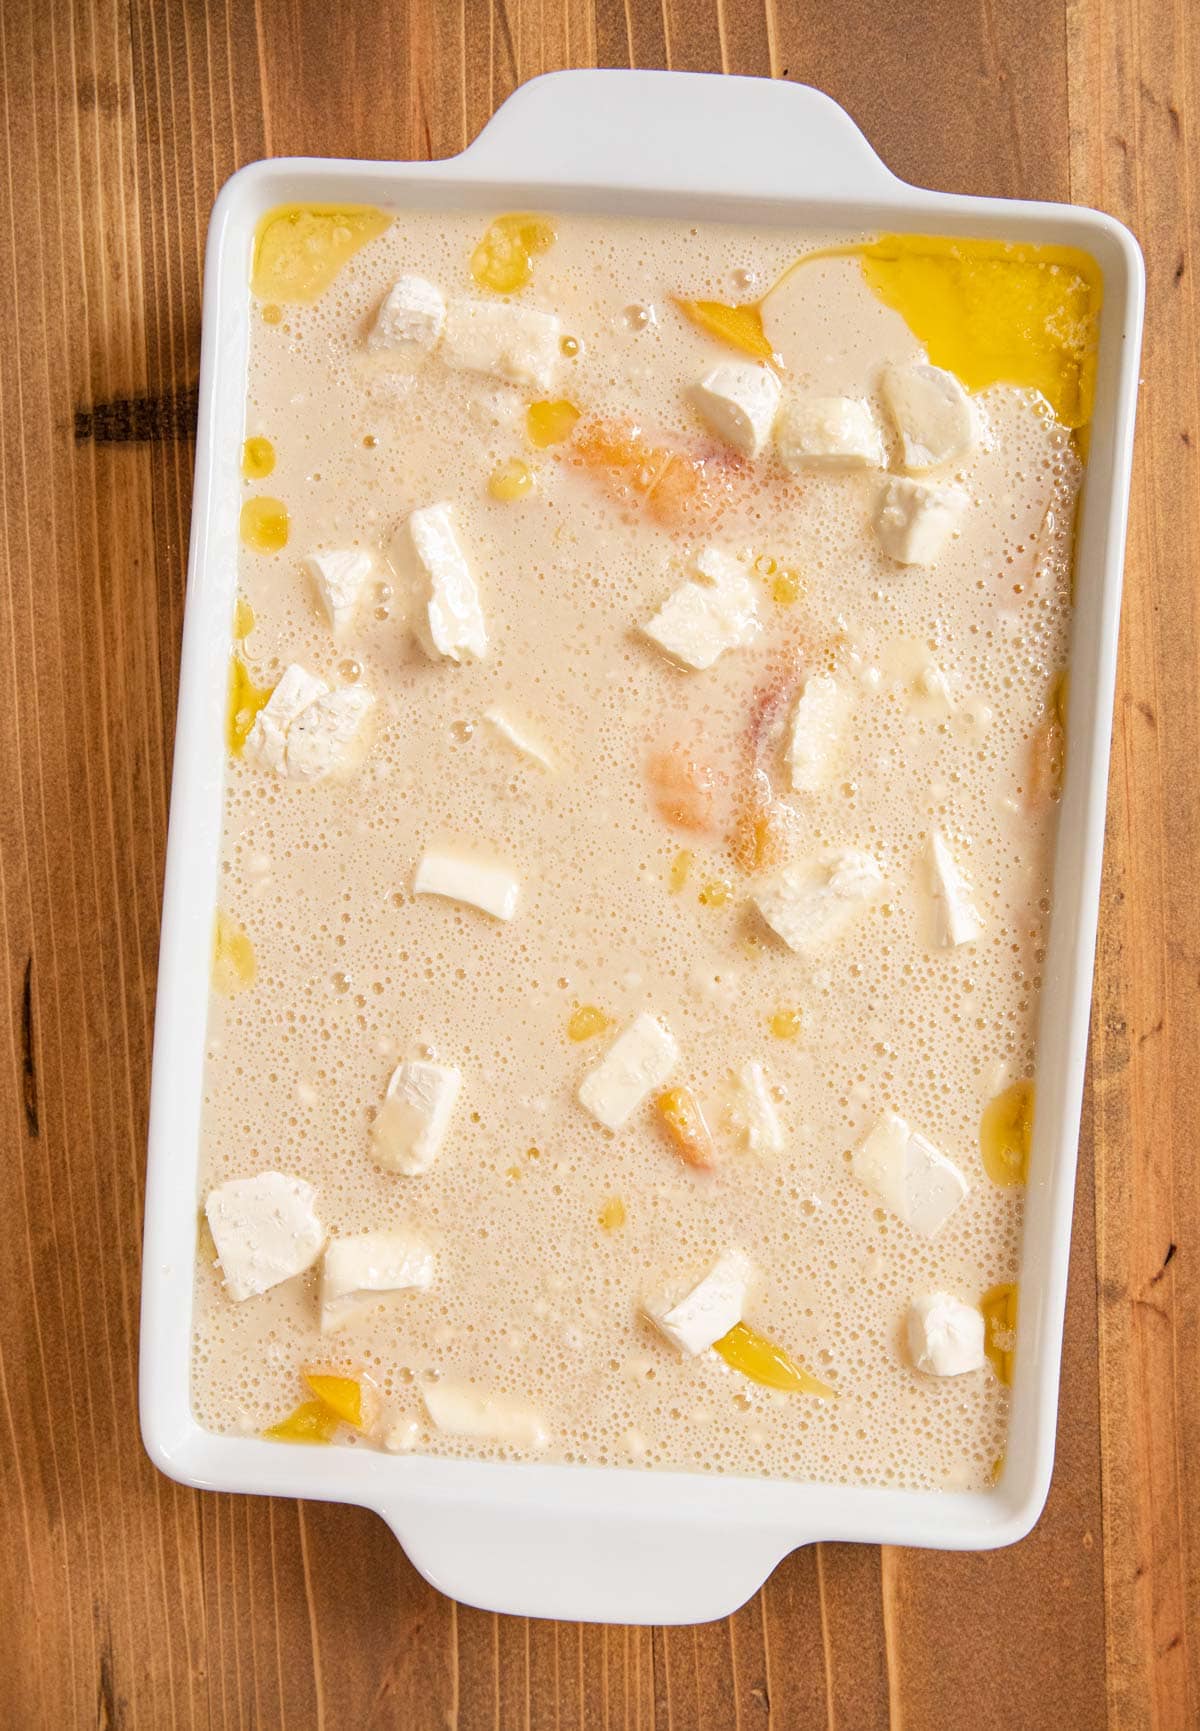 Peaches and Cream Cobbler in baking dish before baking